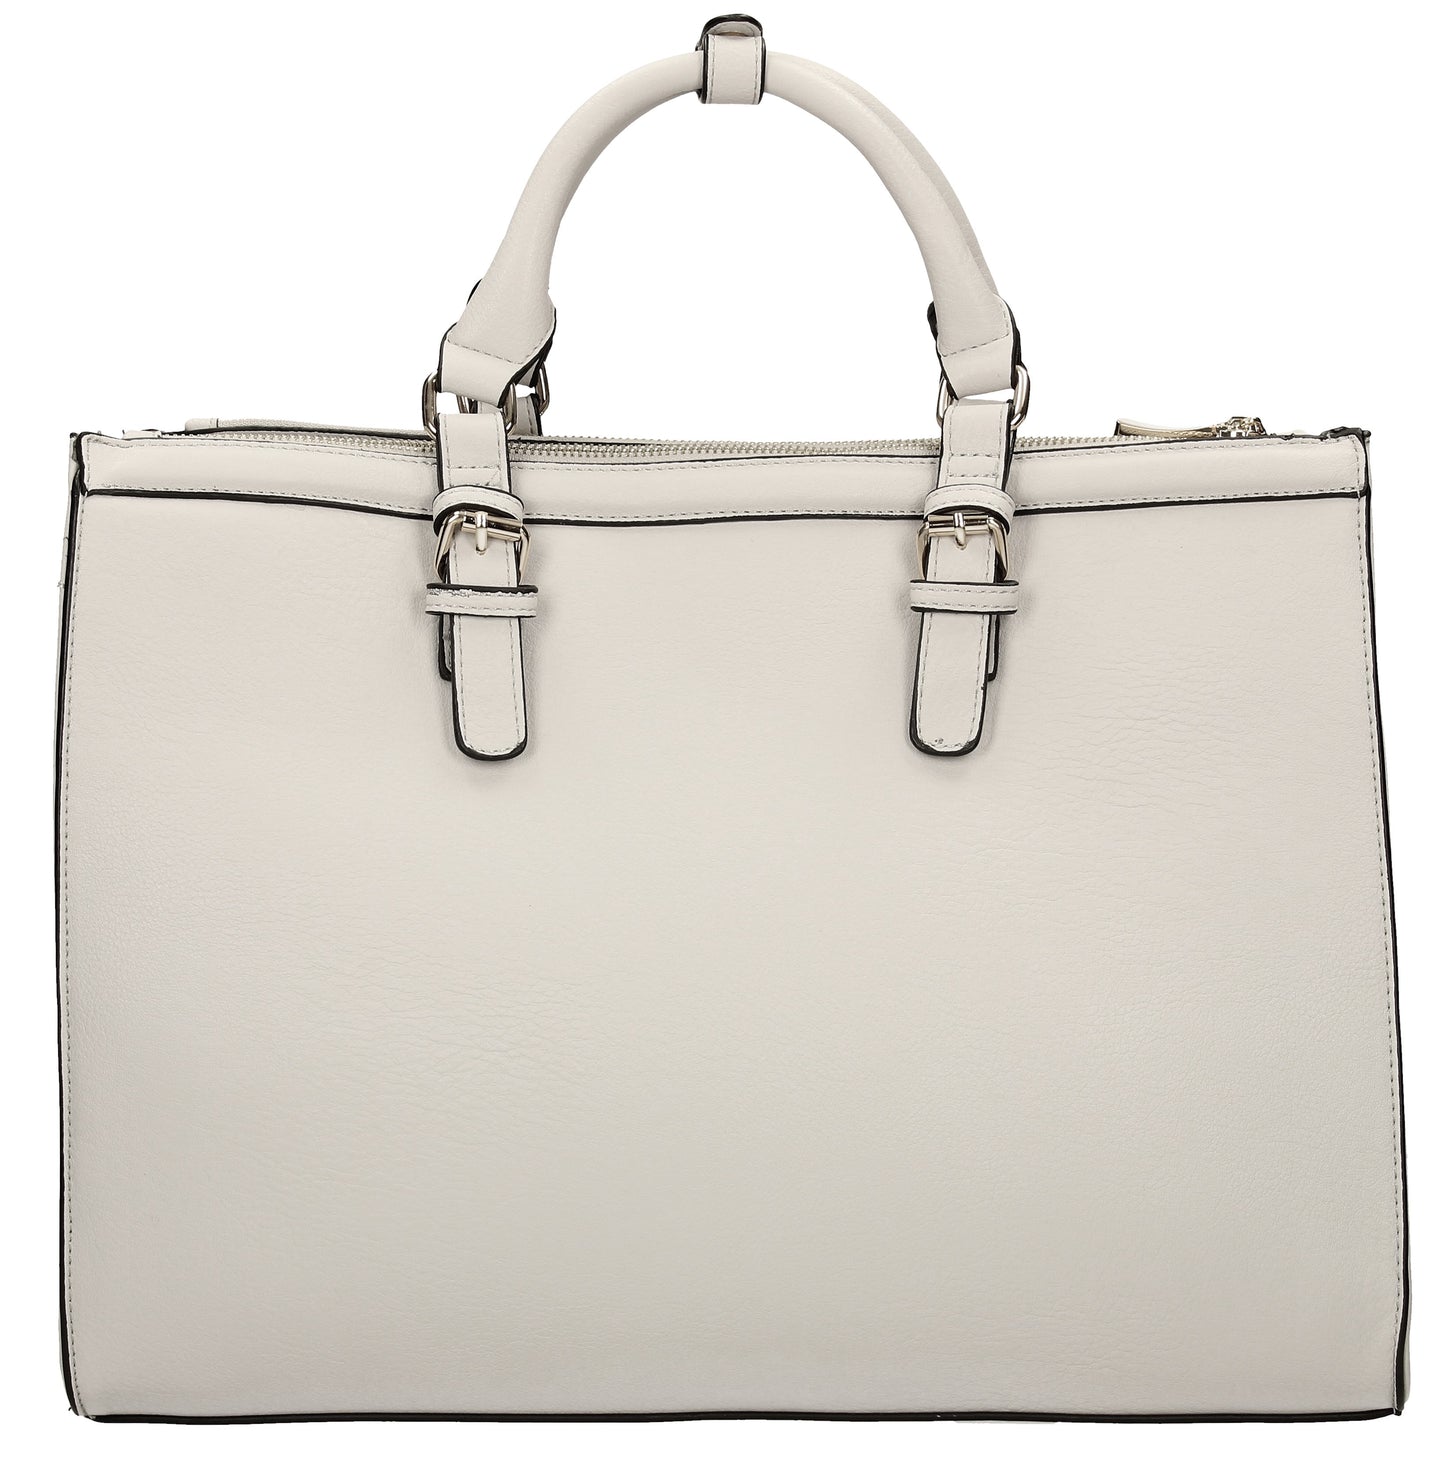 Swanky Swans Marcella Cosmo Handbag Light GreyPerfect for School, Weddings, Day out!